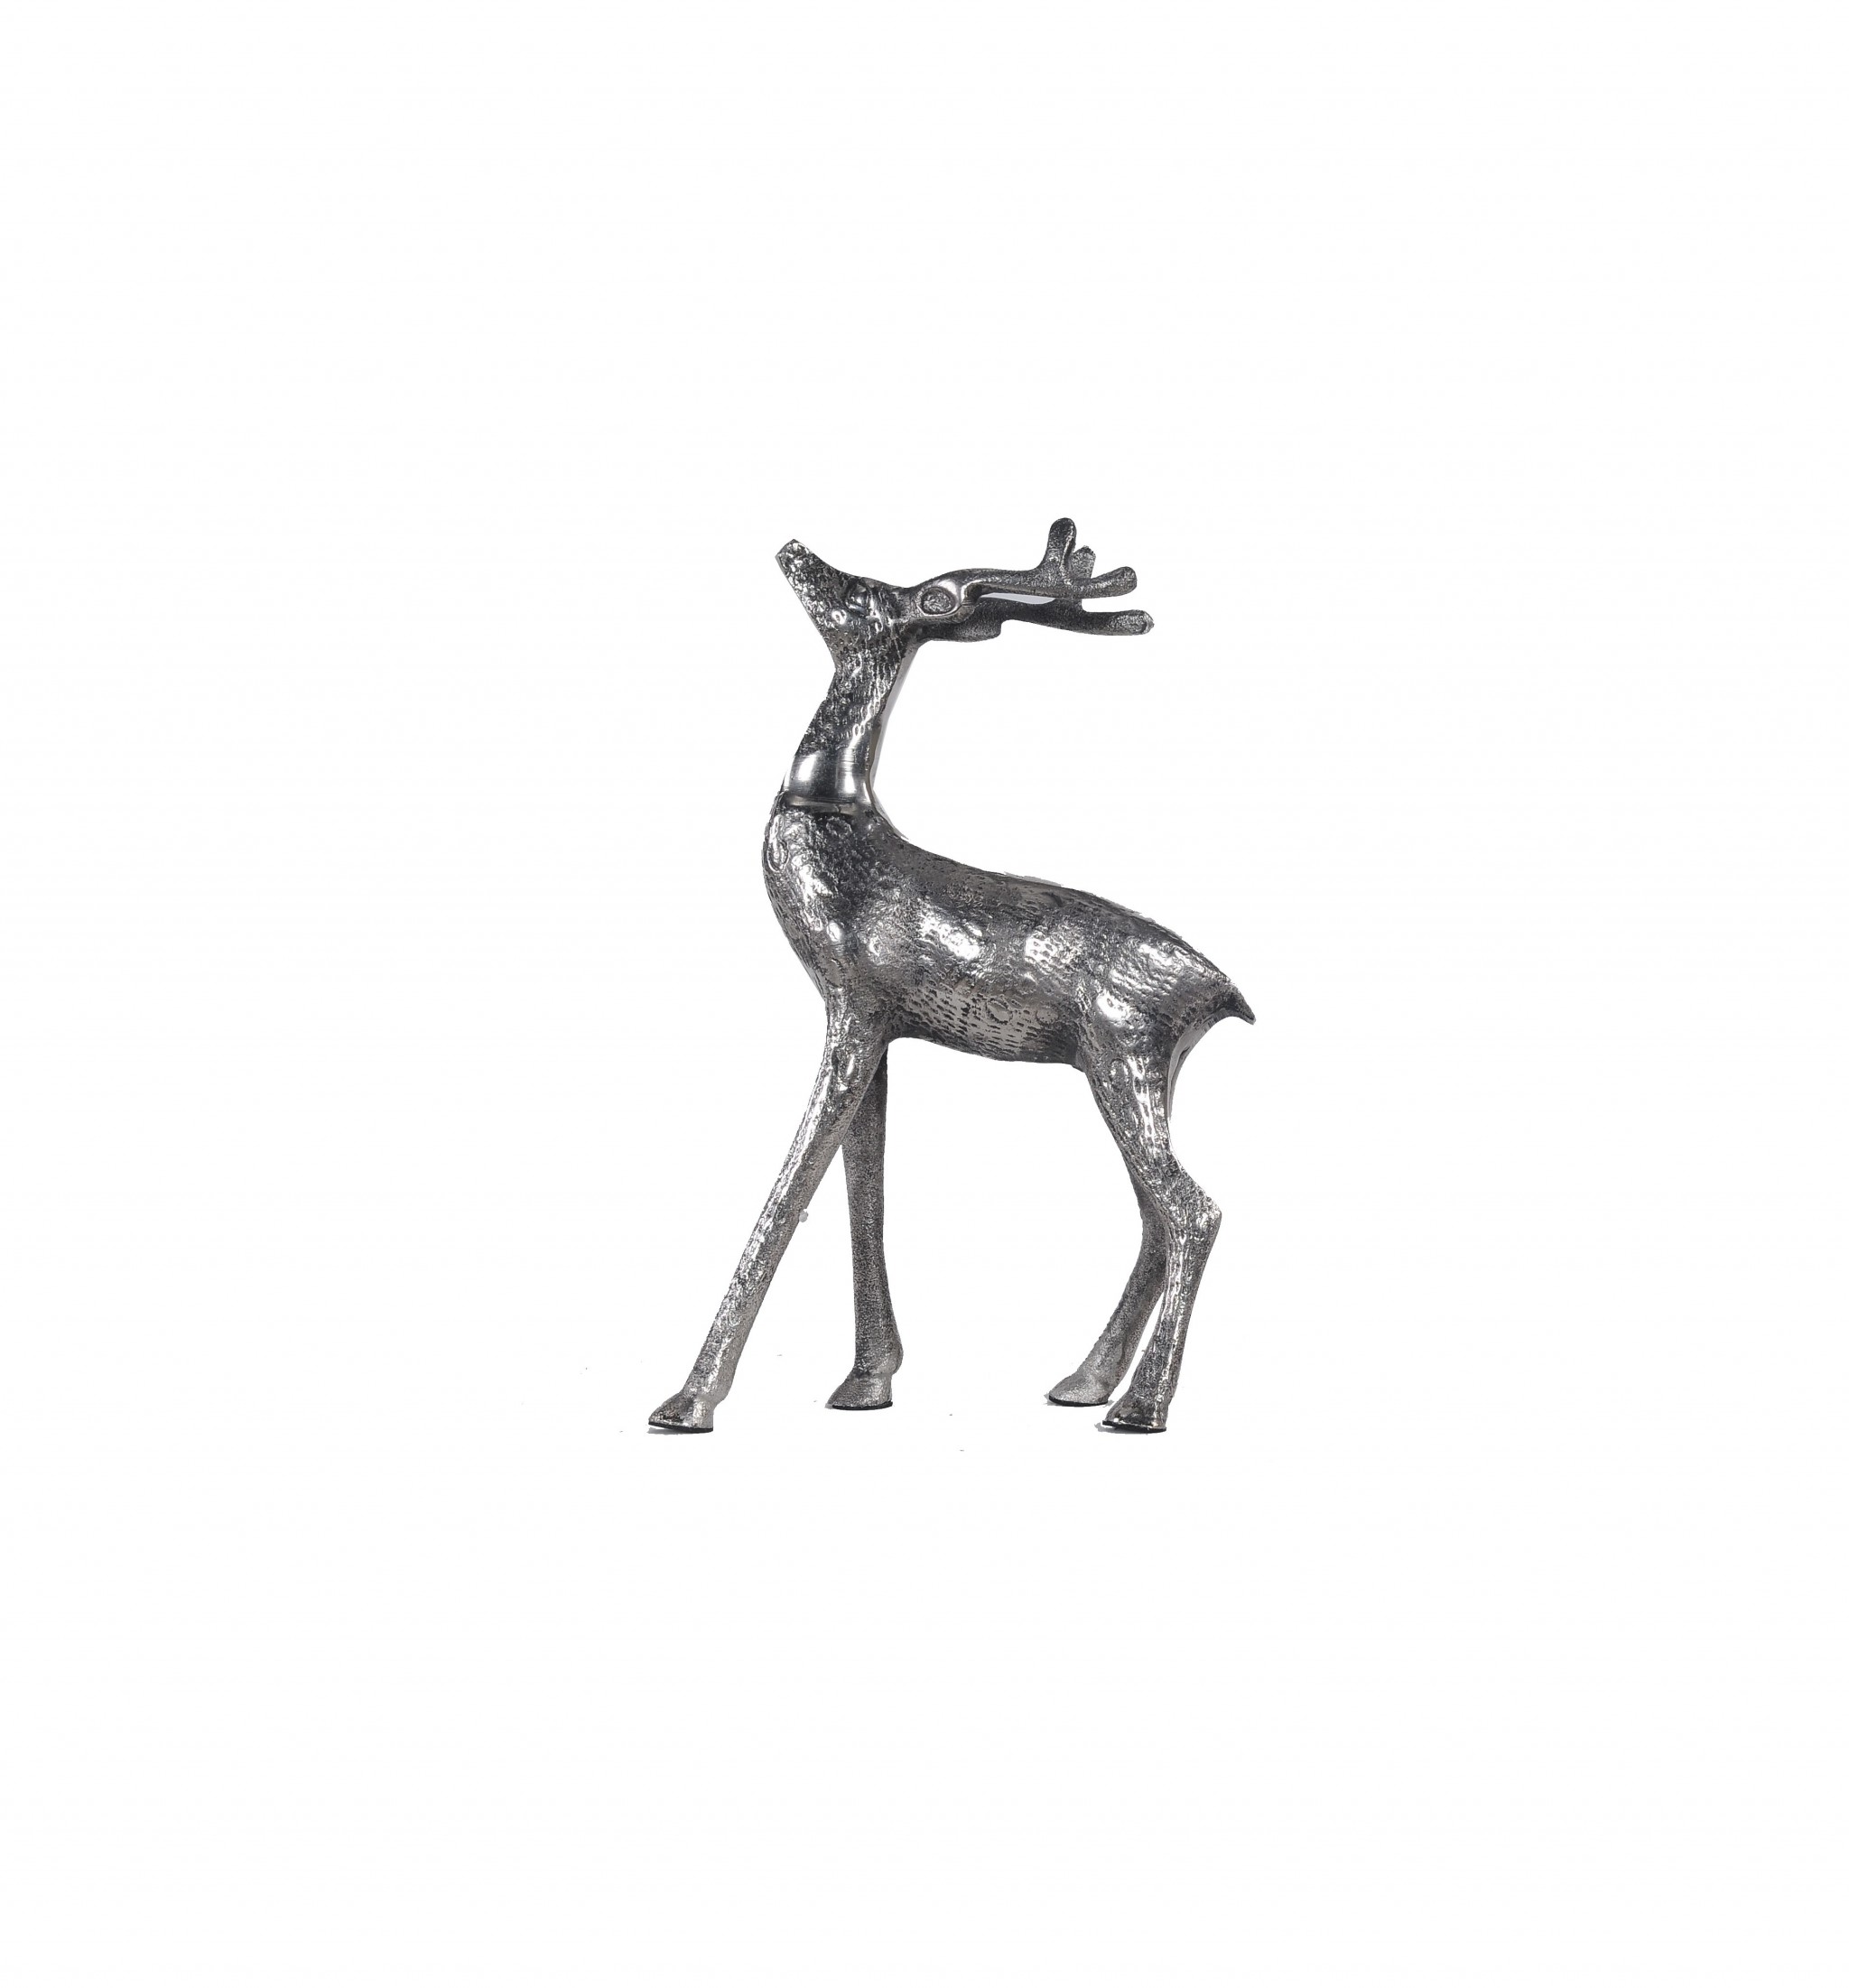 Stag and Doe Bookends or Sculptures